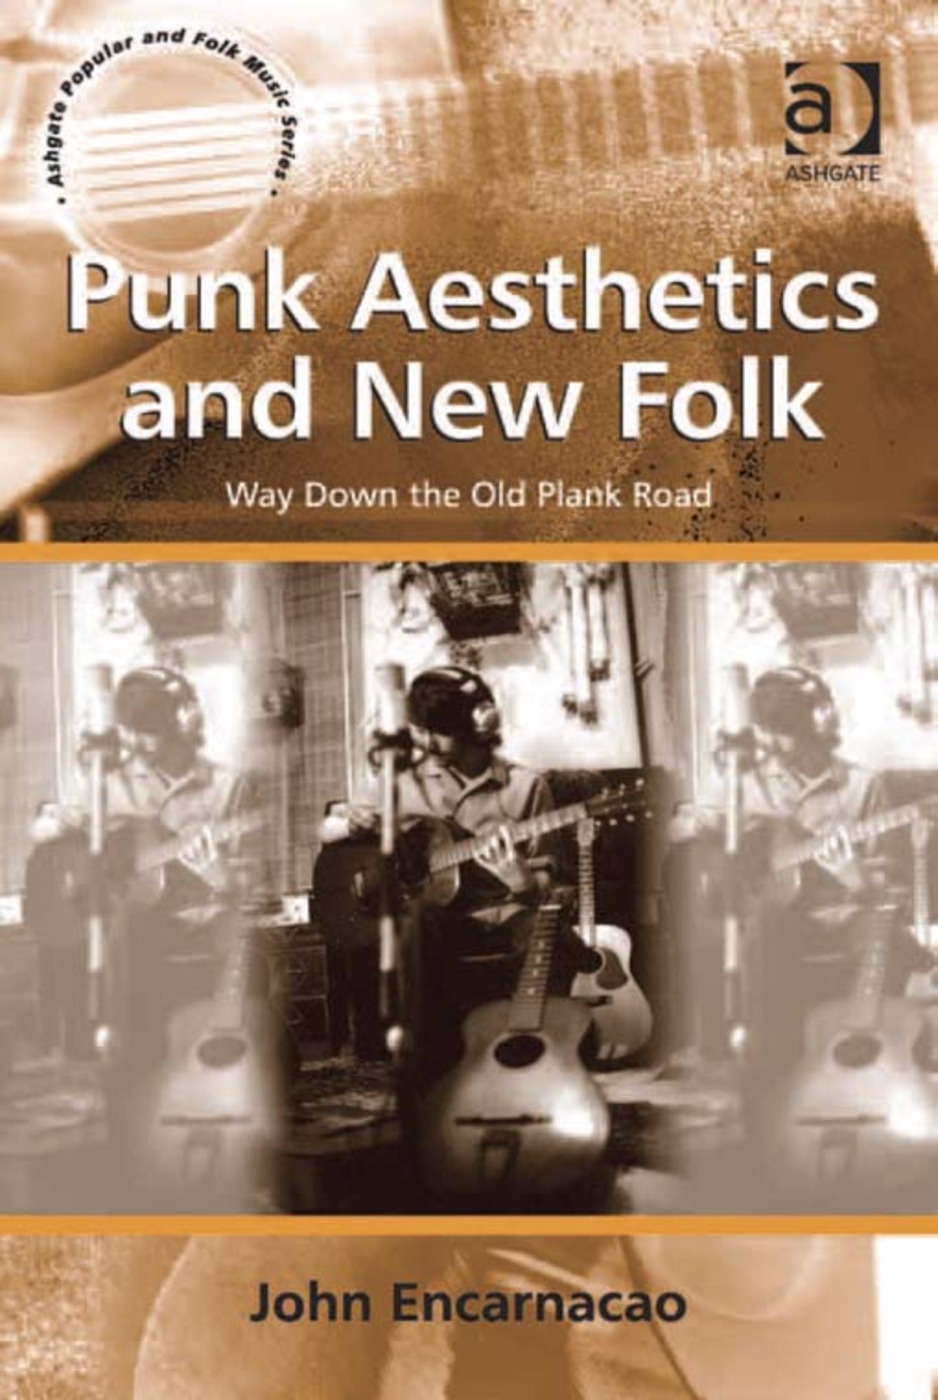 Punk Aesthetics and New Folk: Way Down the Old Plank Road. by John Encarnacao